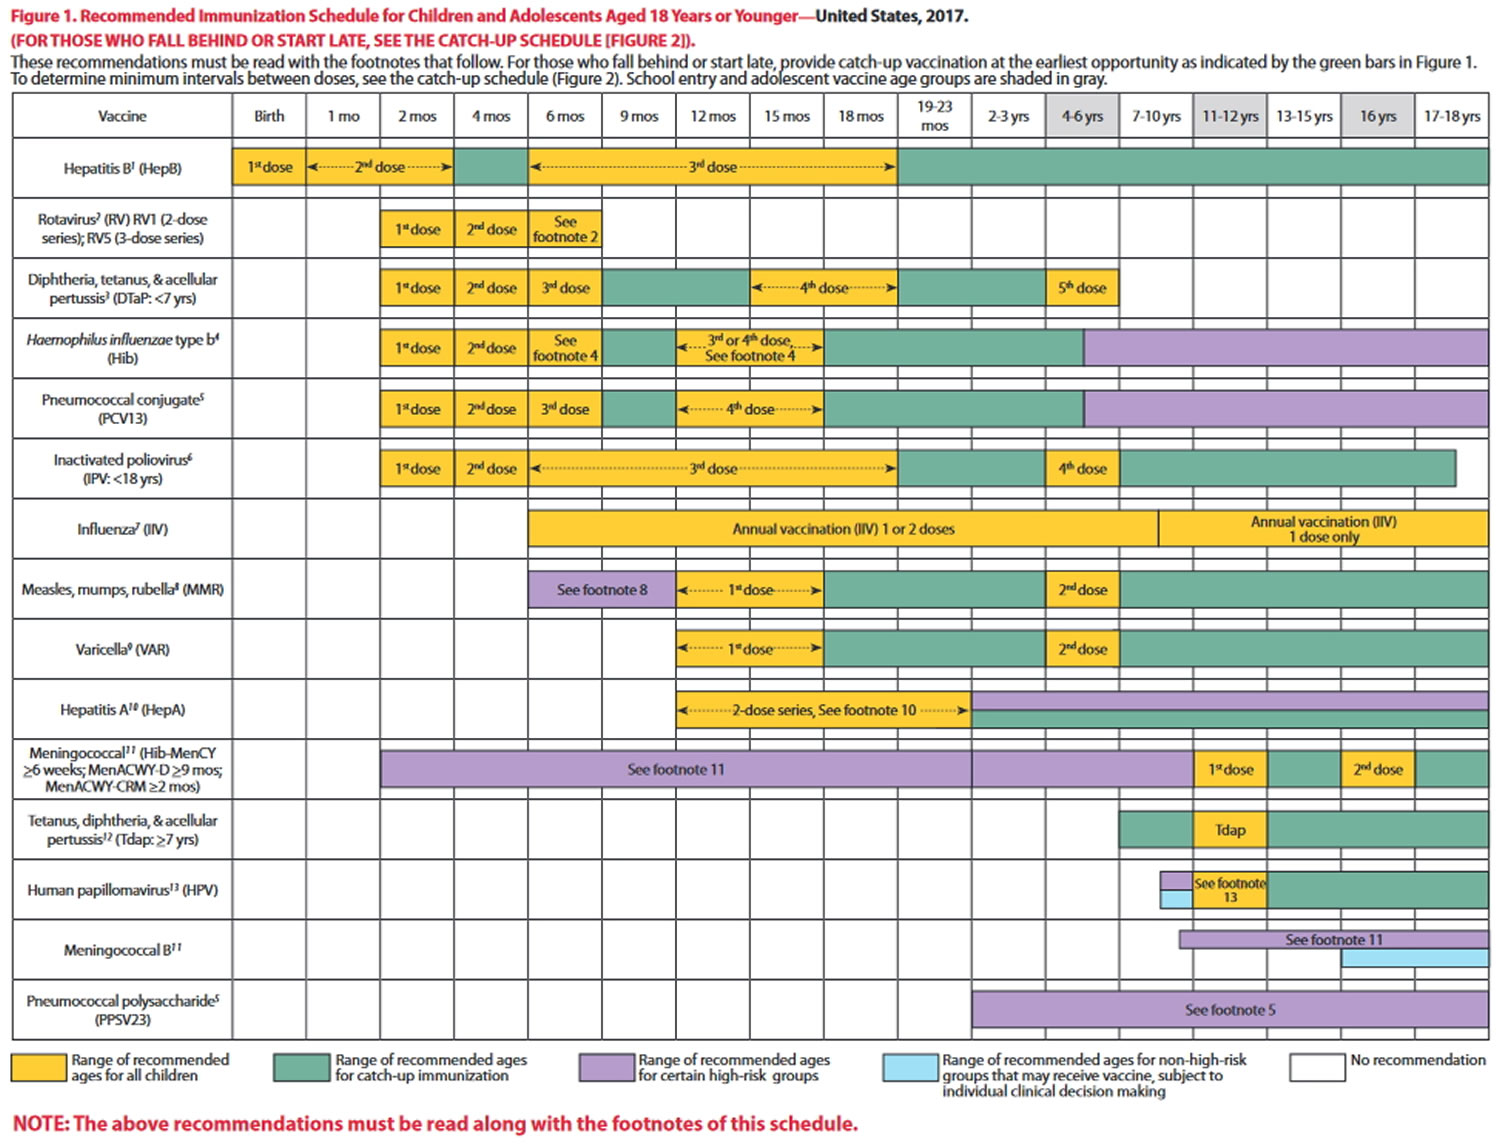 Vaccination Schedule For Children And Adolescents Aged 18 Years Or Younger 